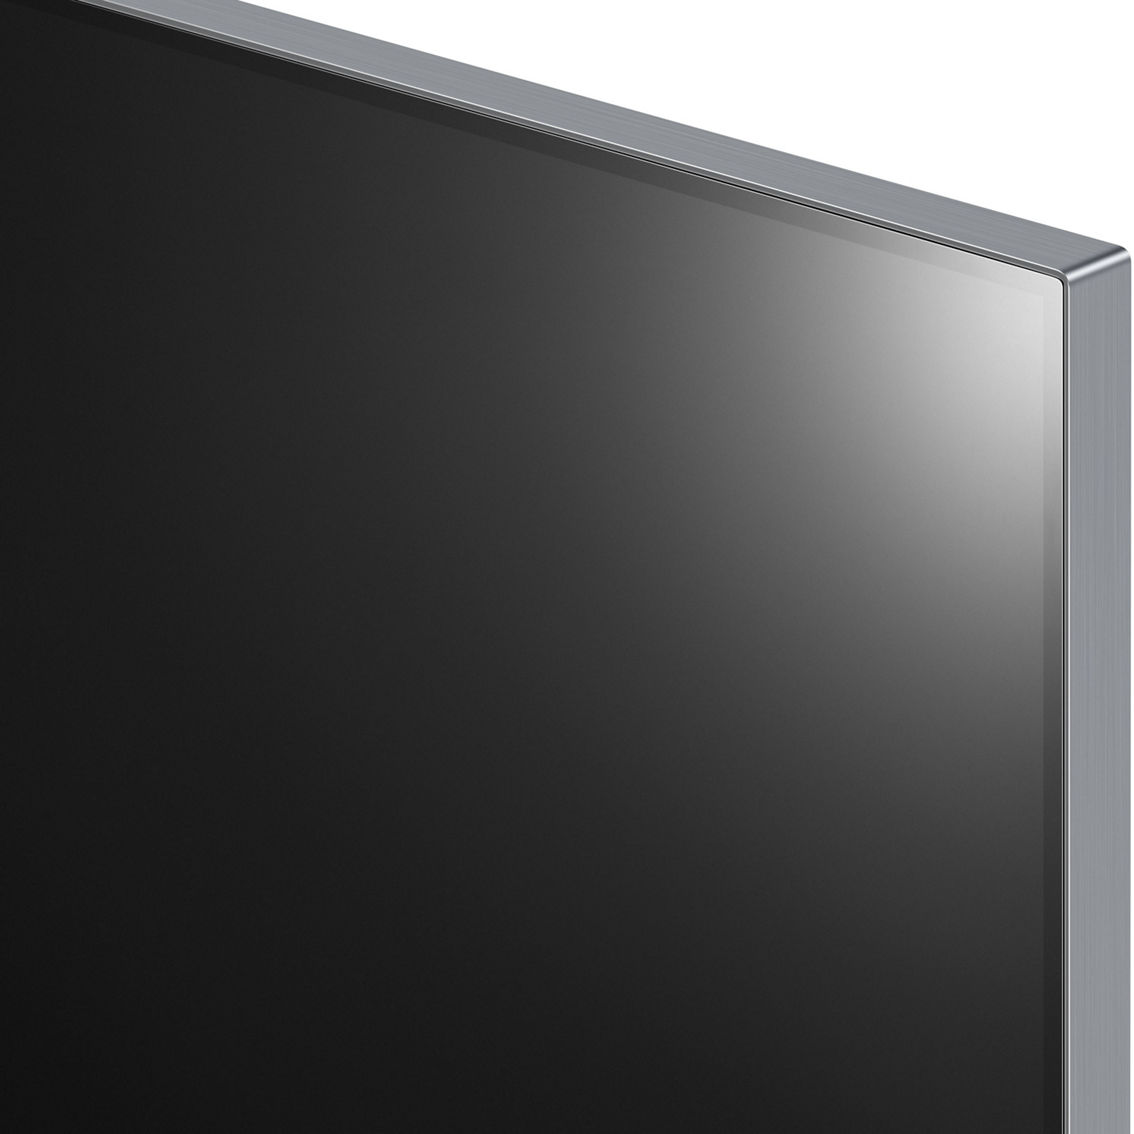 LG 83 in. OLED M3 Evo Smart TV with Wireless 4K Connectivity OLED83M3PUA - Image 7 of 10